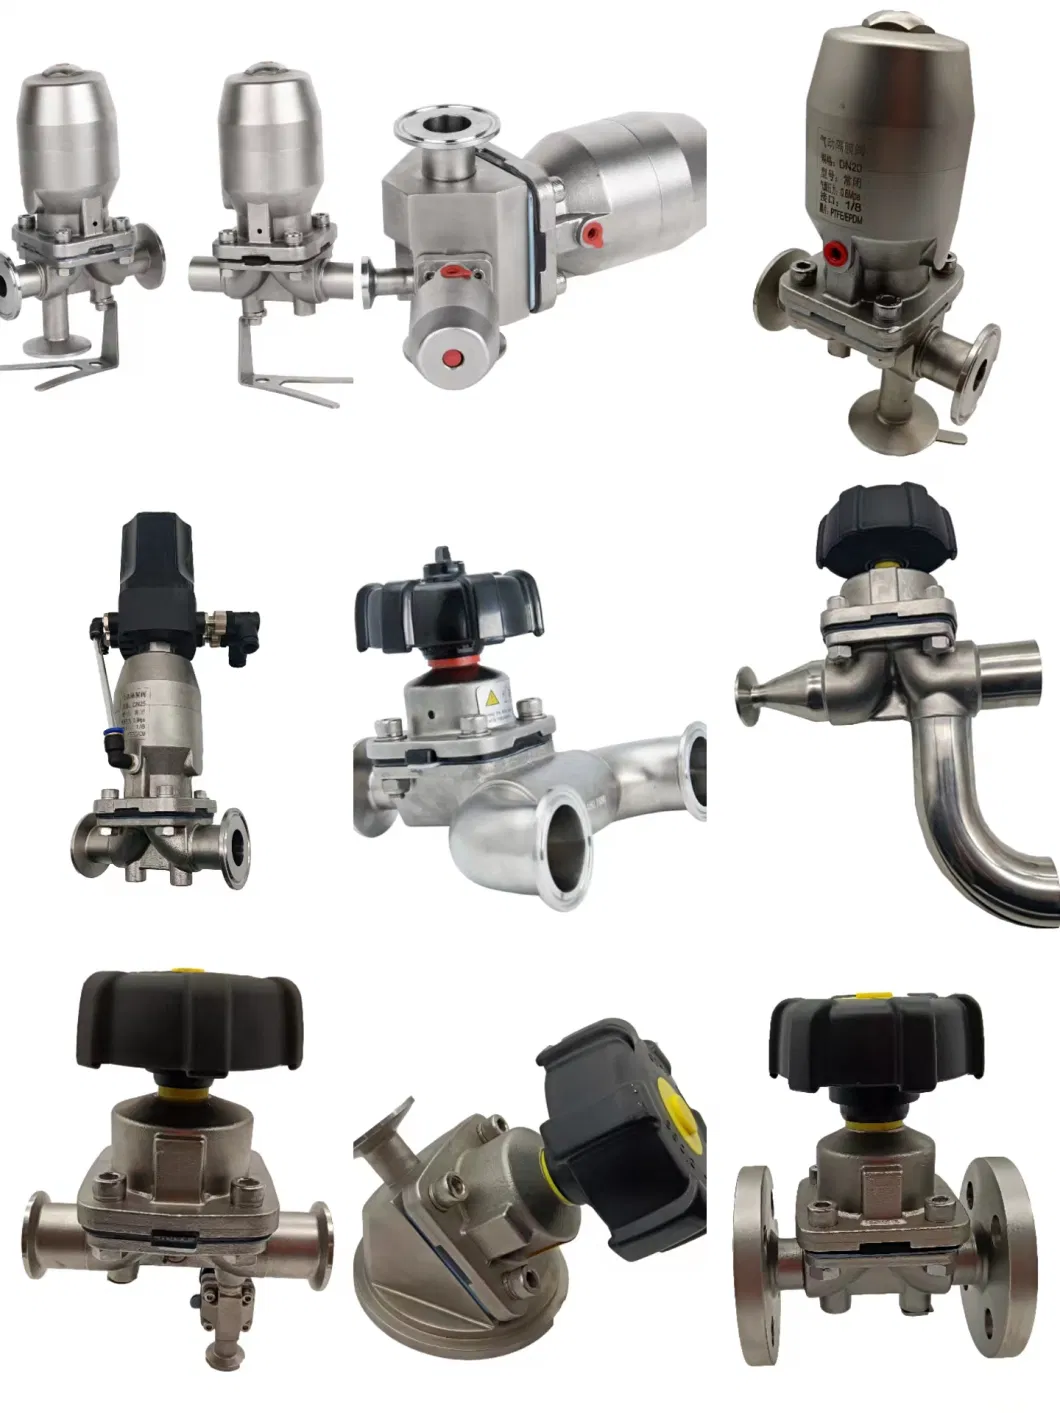 Sanitary Stainless Steel Pneumatic Operated Diaphragm Valve for Flow Control/Pharmaceutical/Food